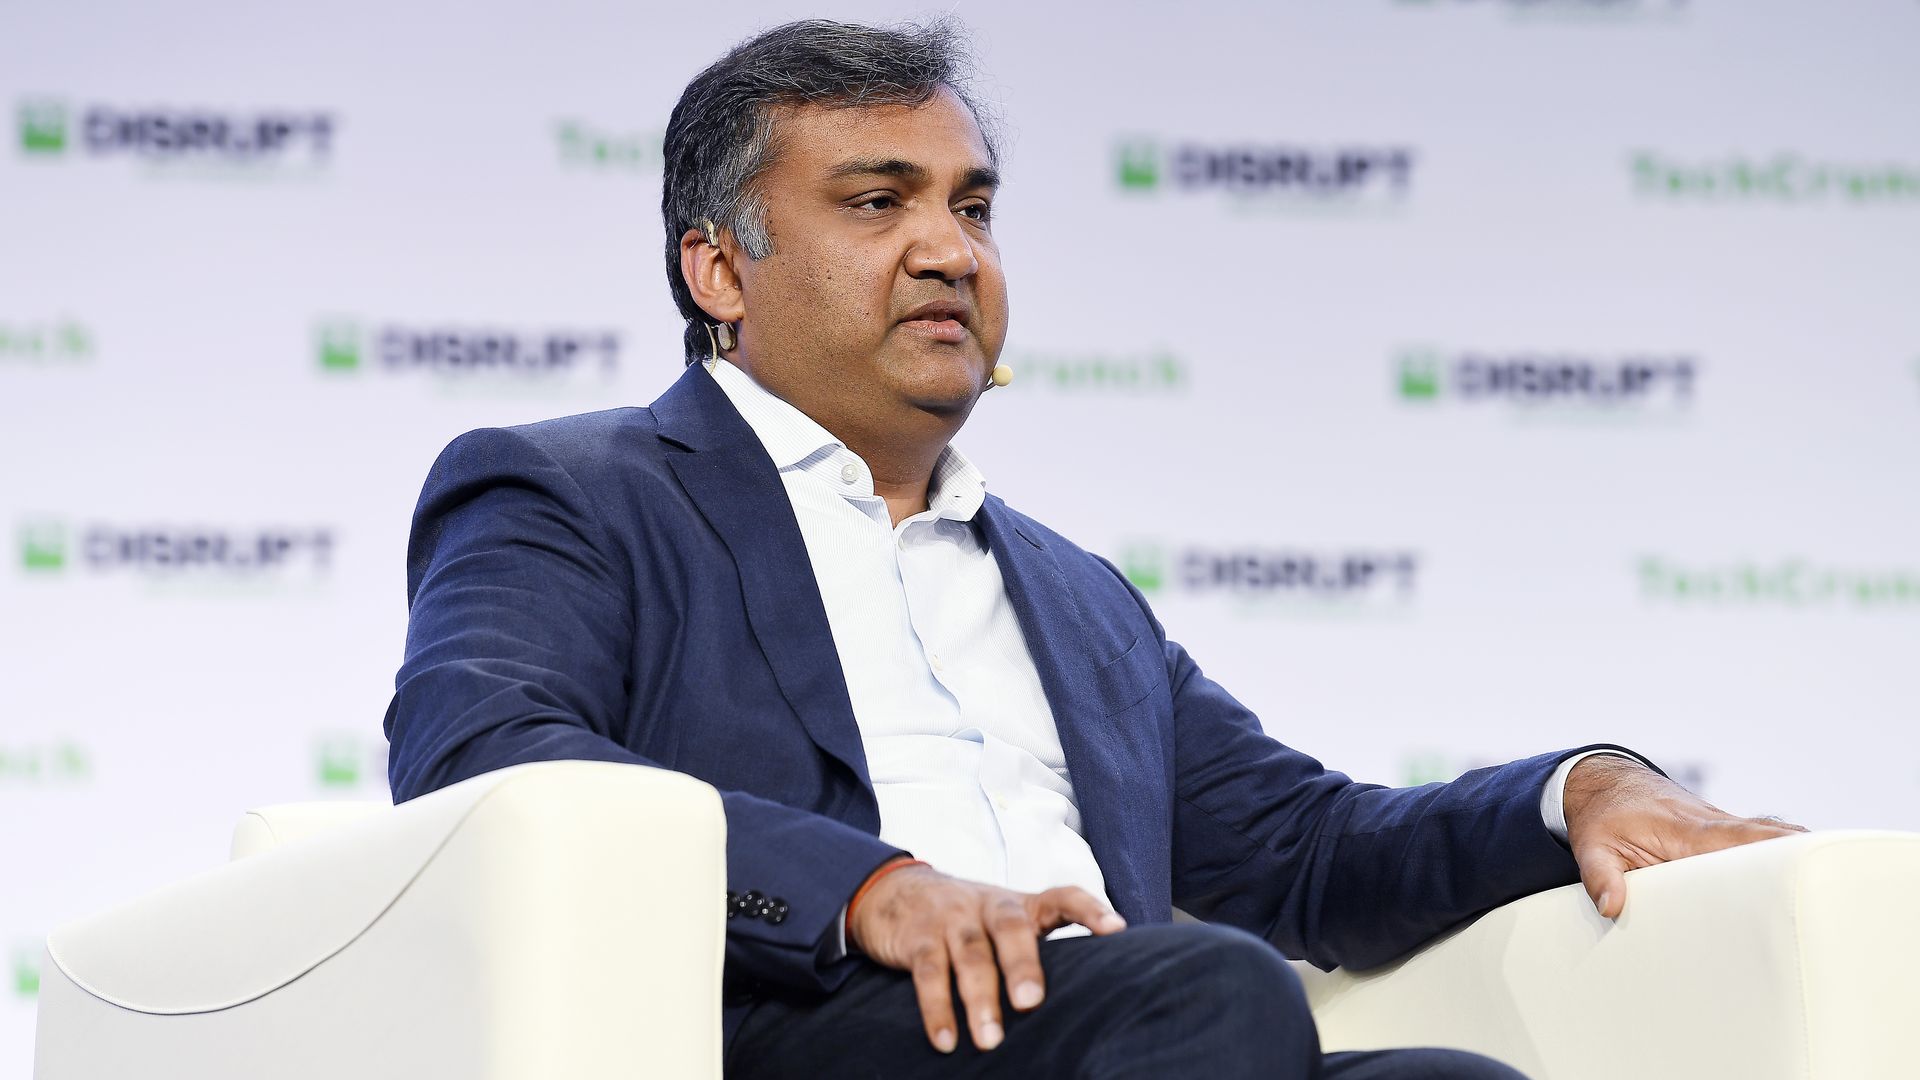 YouTube Chief Product Officer Neal Mohan speaks onstage during TechCrunch Disrupt San Francisco 2019